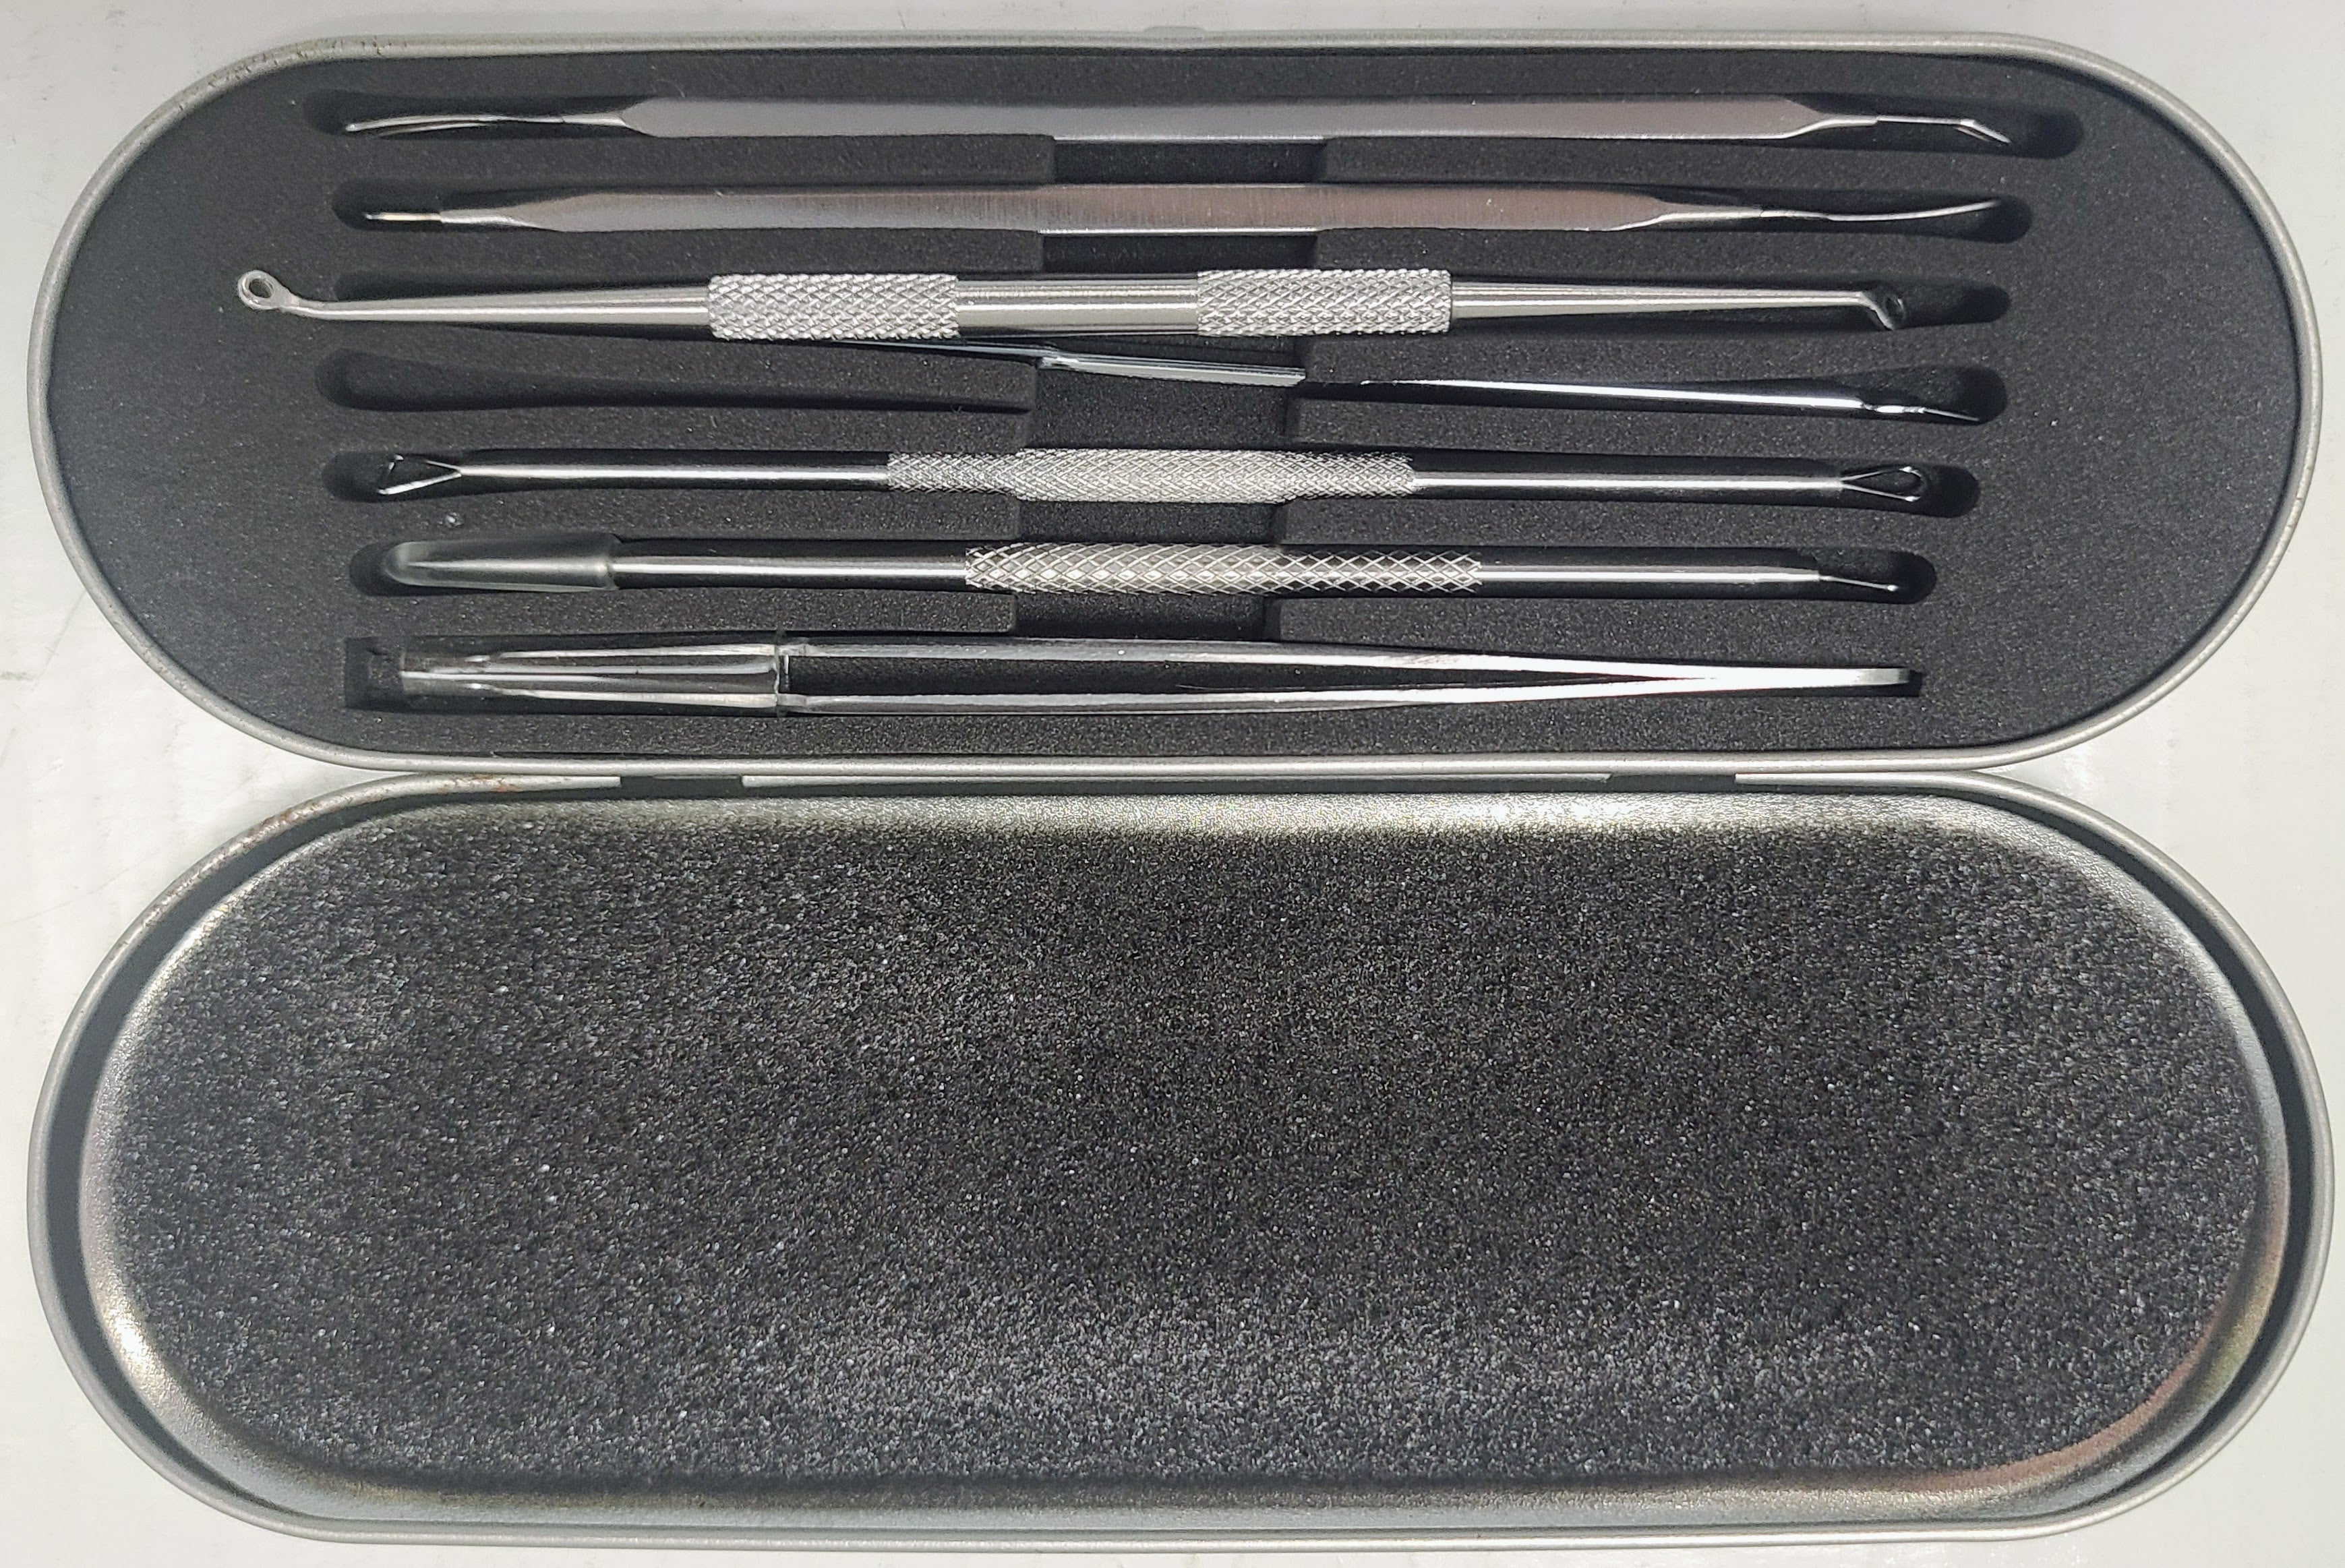 Blackhead Remover 7pcs Professional Stainless Steel Clean Tool Kit with Portable Box - new